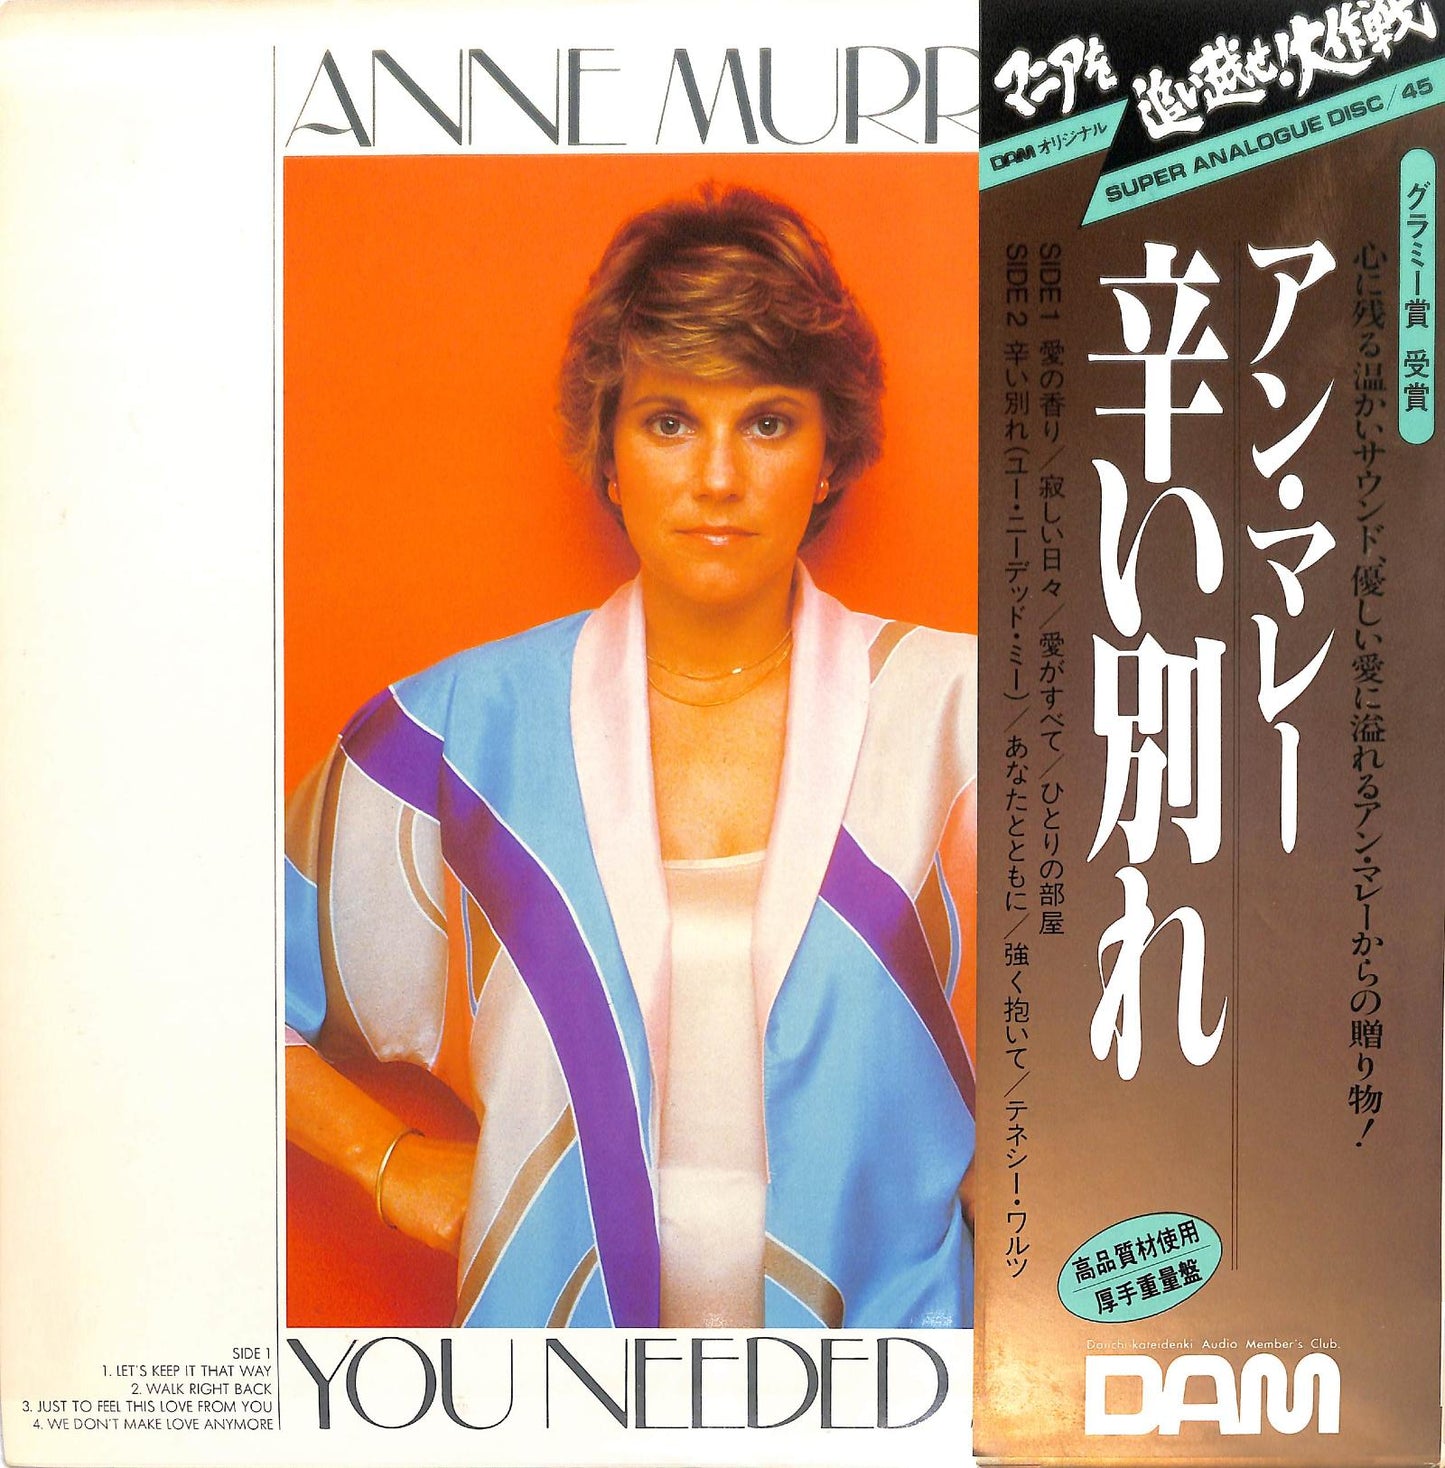 ANNE MURRAY - Let's Keep It That Way